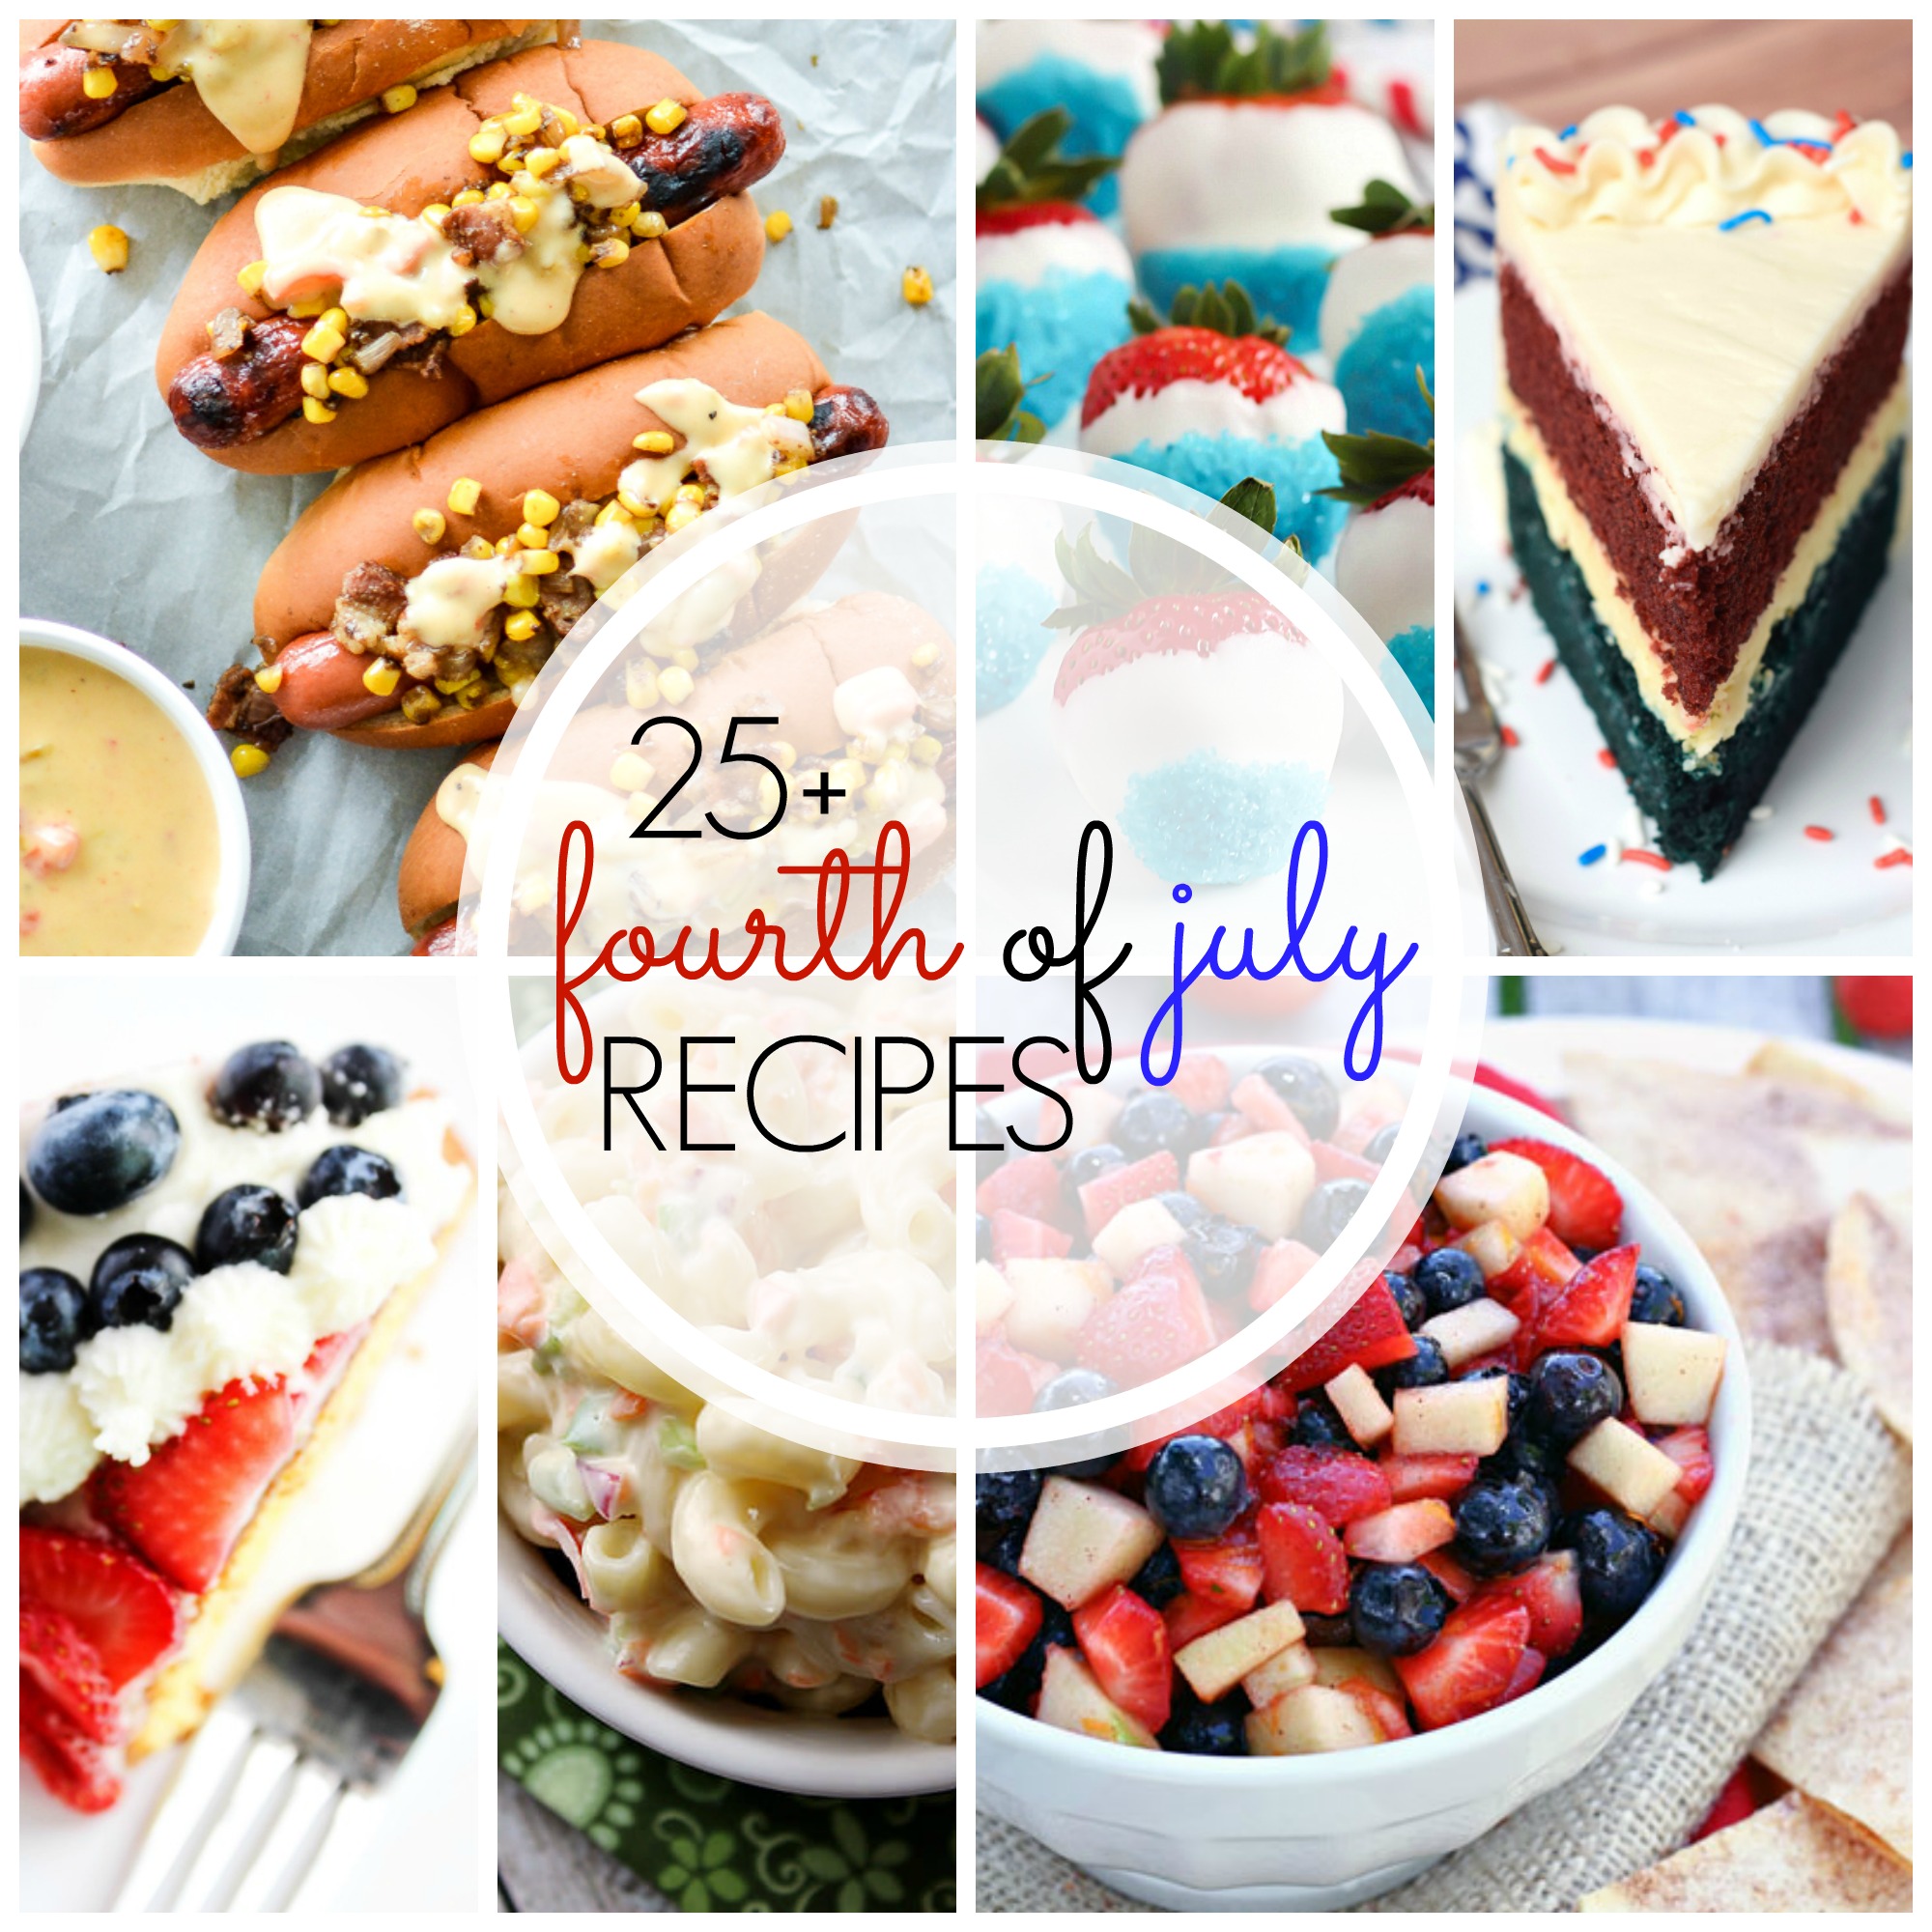 25+ Amazing Recipes for the 4th of July